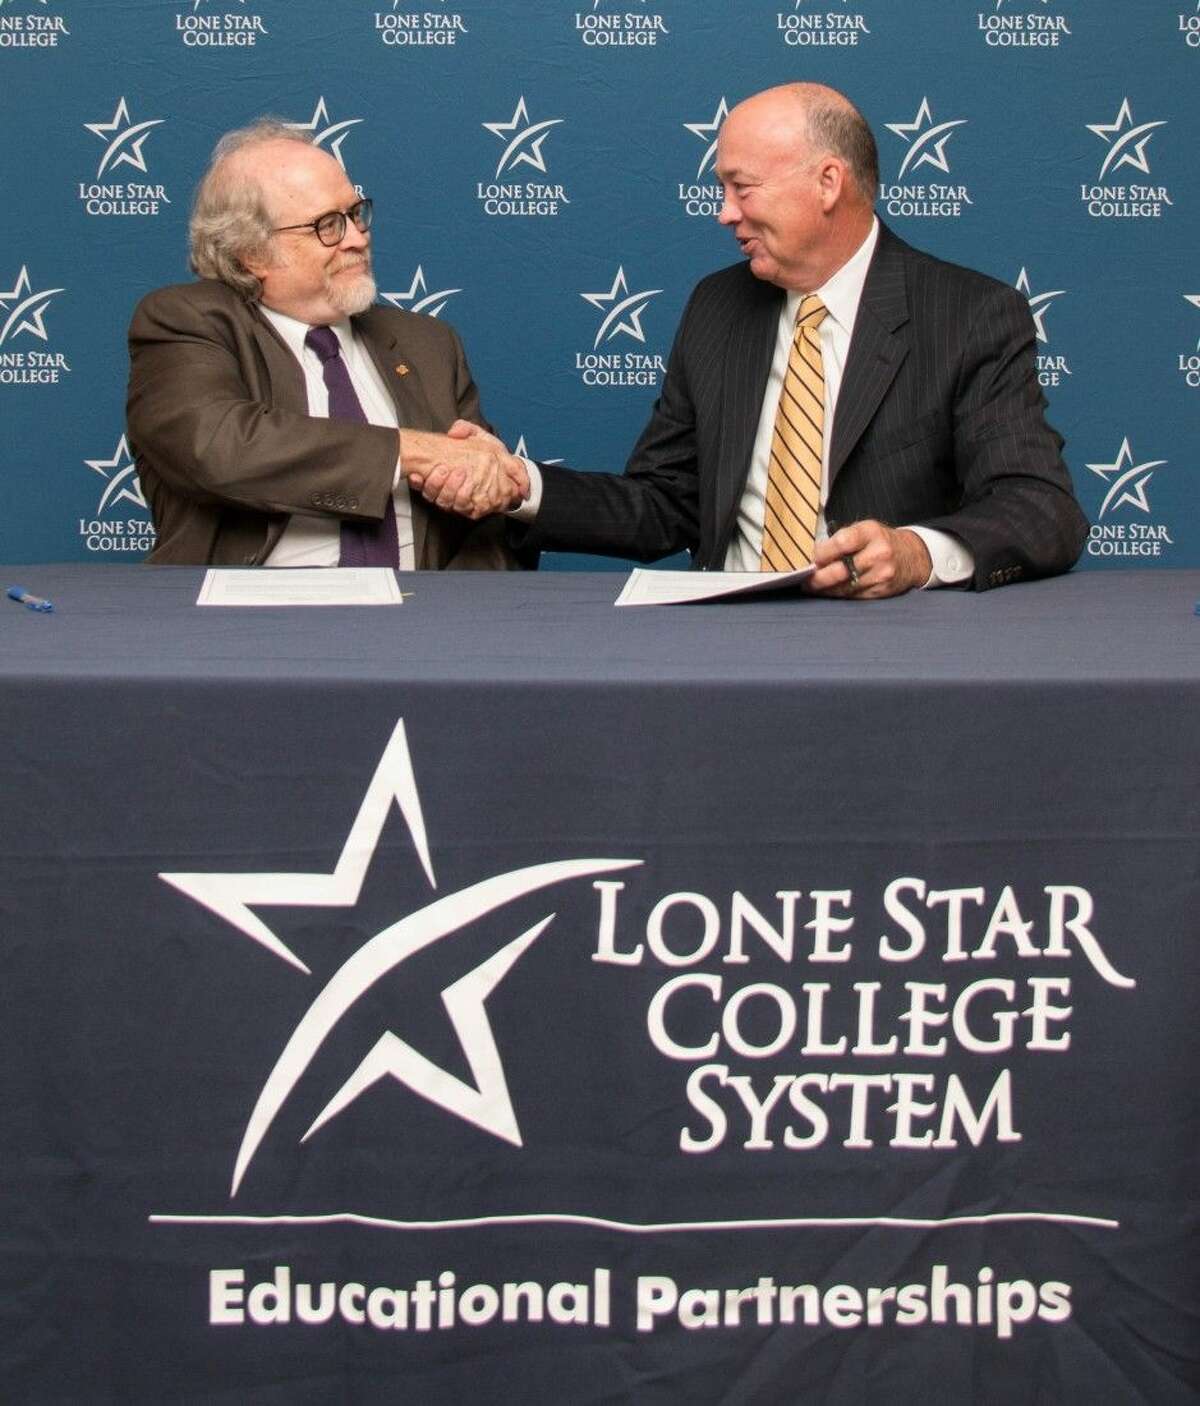 Dr. Richard Berry, Steven F. Austin University provost and vice president of academic affairs (pictured left) shakes hands with Steven C. Head Ph.D., Lone Star College chancellor after signing an articulation agreement to formalize a pathway for easier student transfers from a two-year degree at LSC on to a four-year degree at SFA.